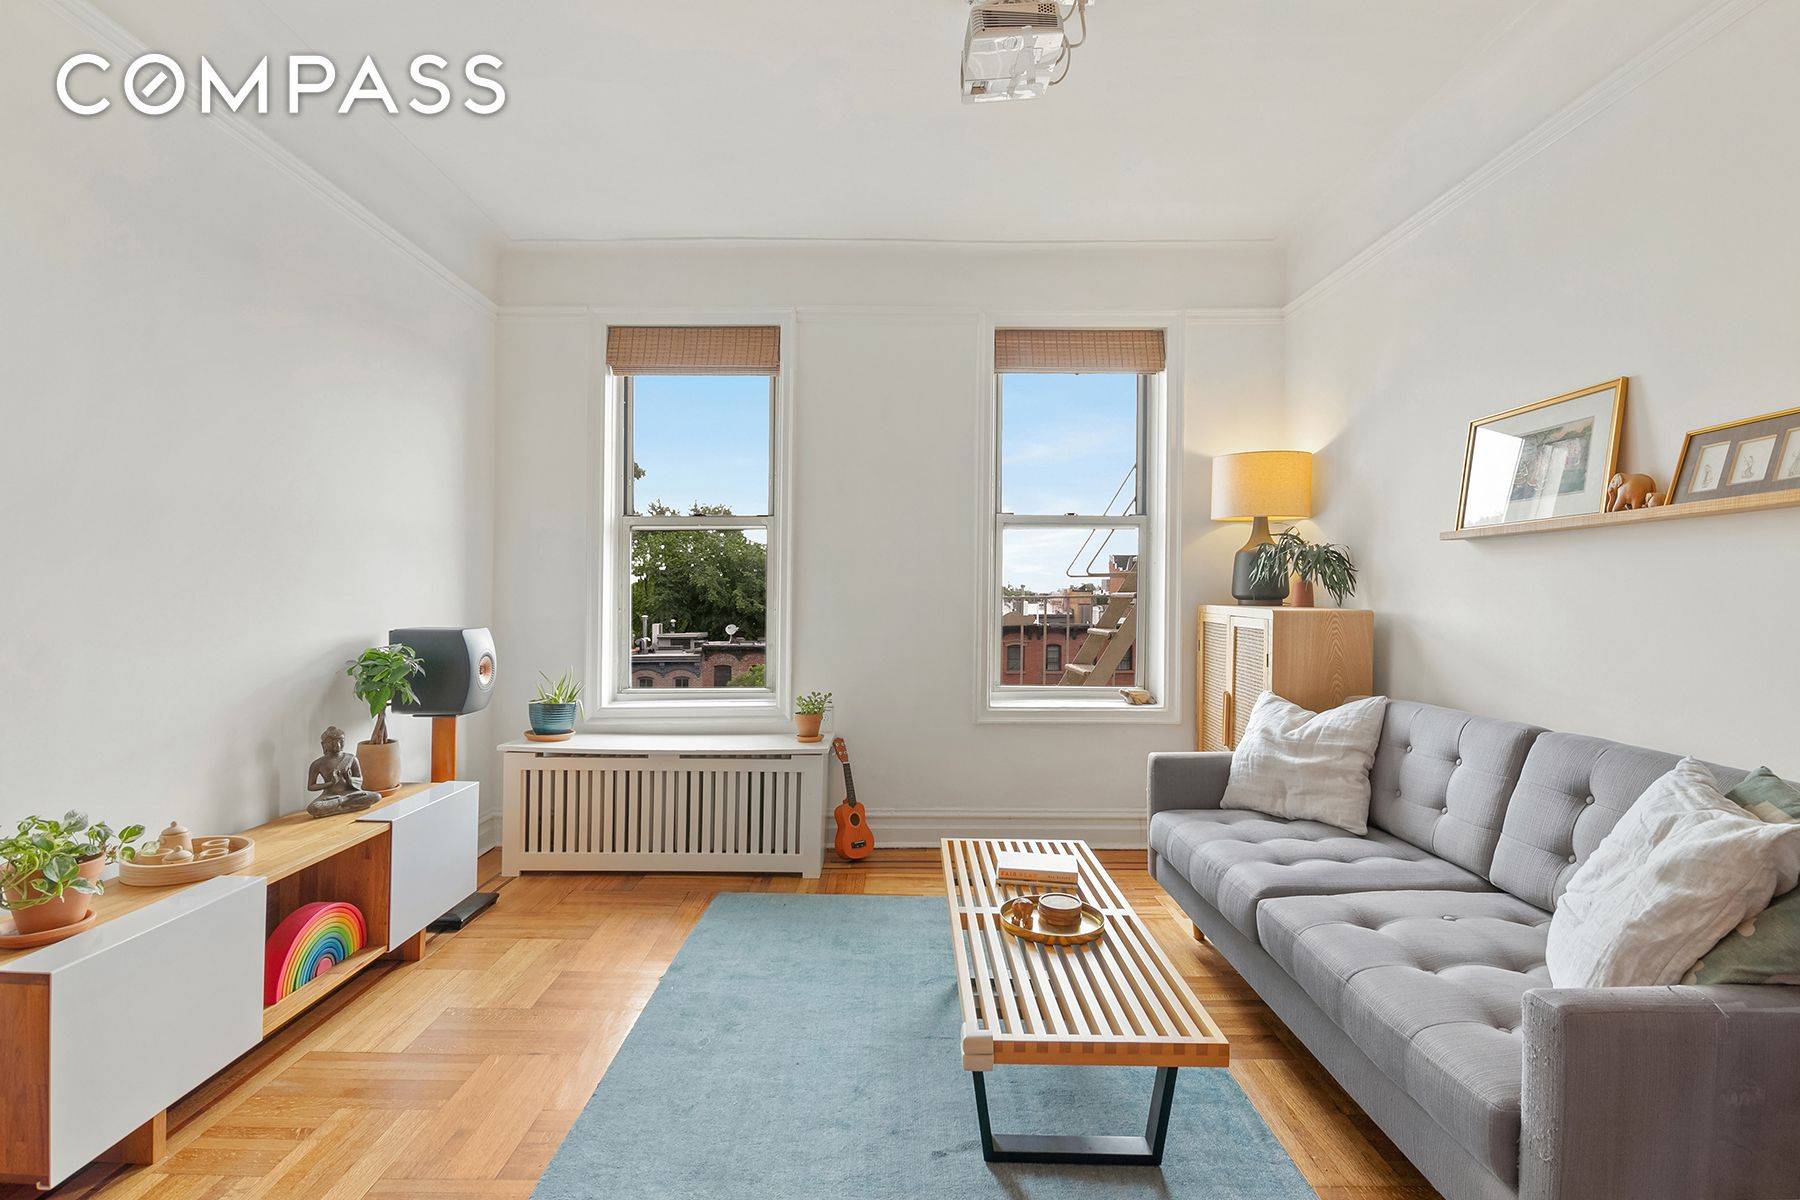 Ideally located on charming renowned Mansion Row in the Clinton Hill area, this recently renovated tranquil 1BR residence has all the warm, charming, and chic you are looking for.